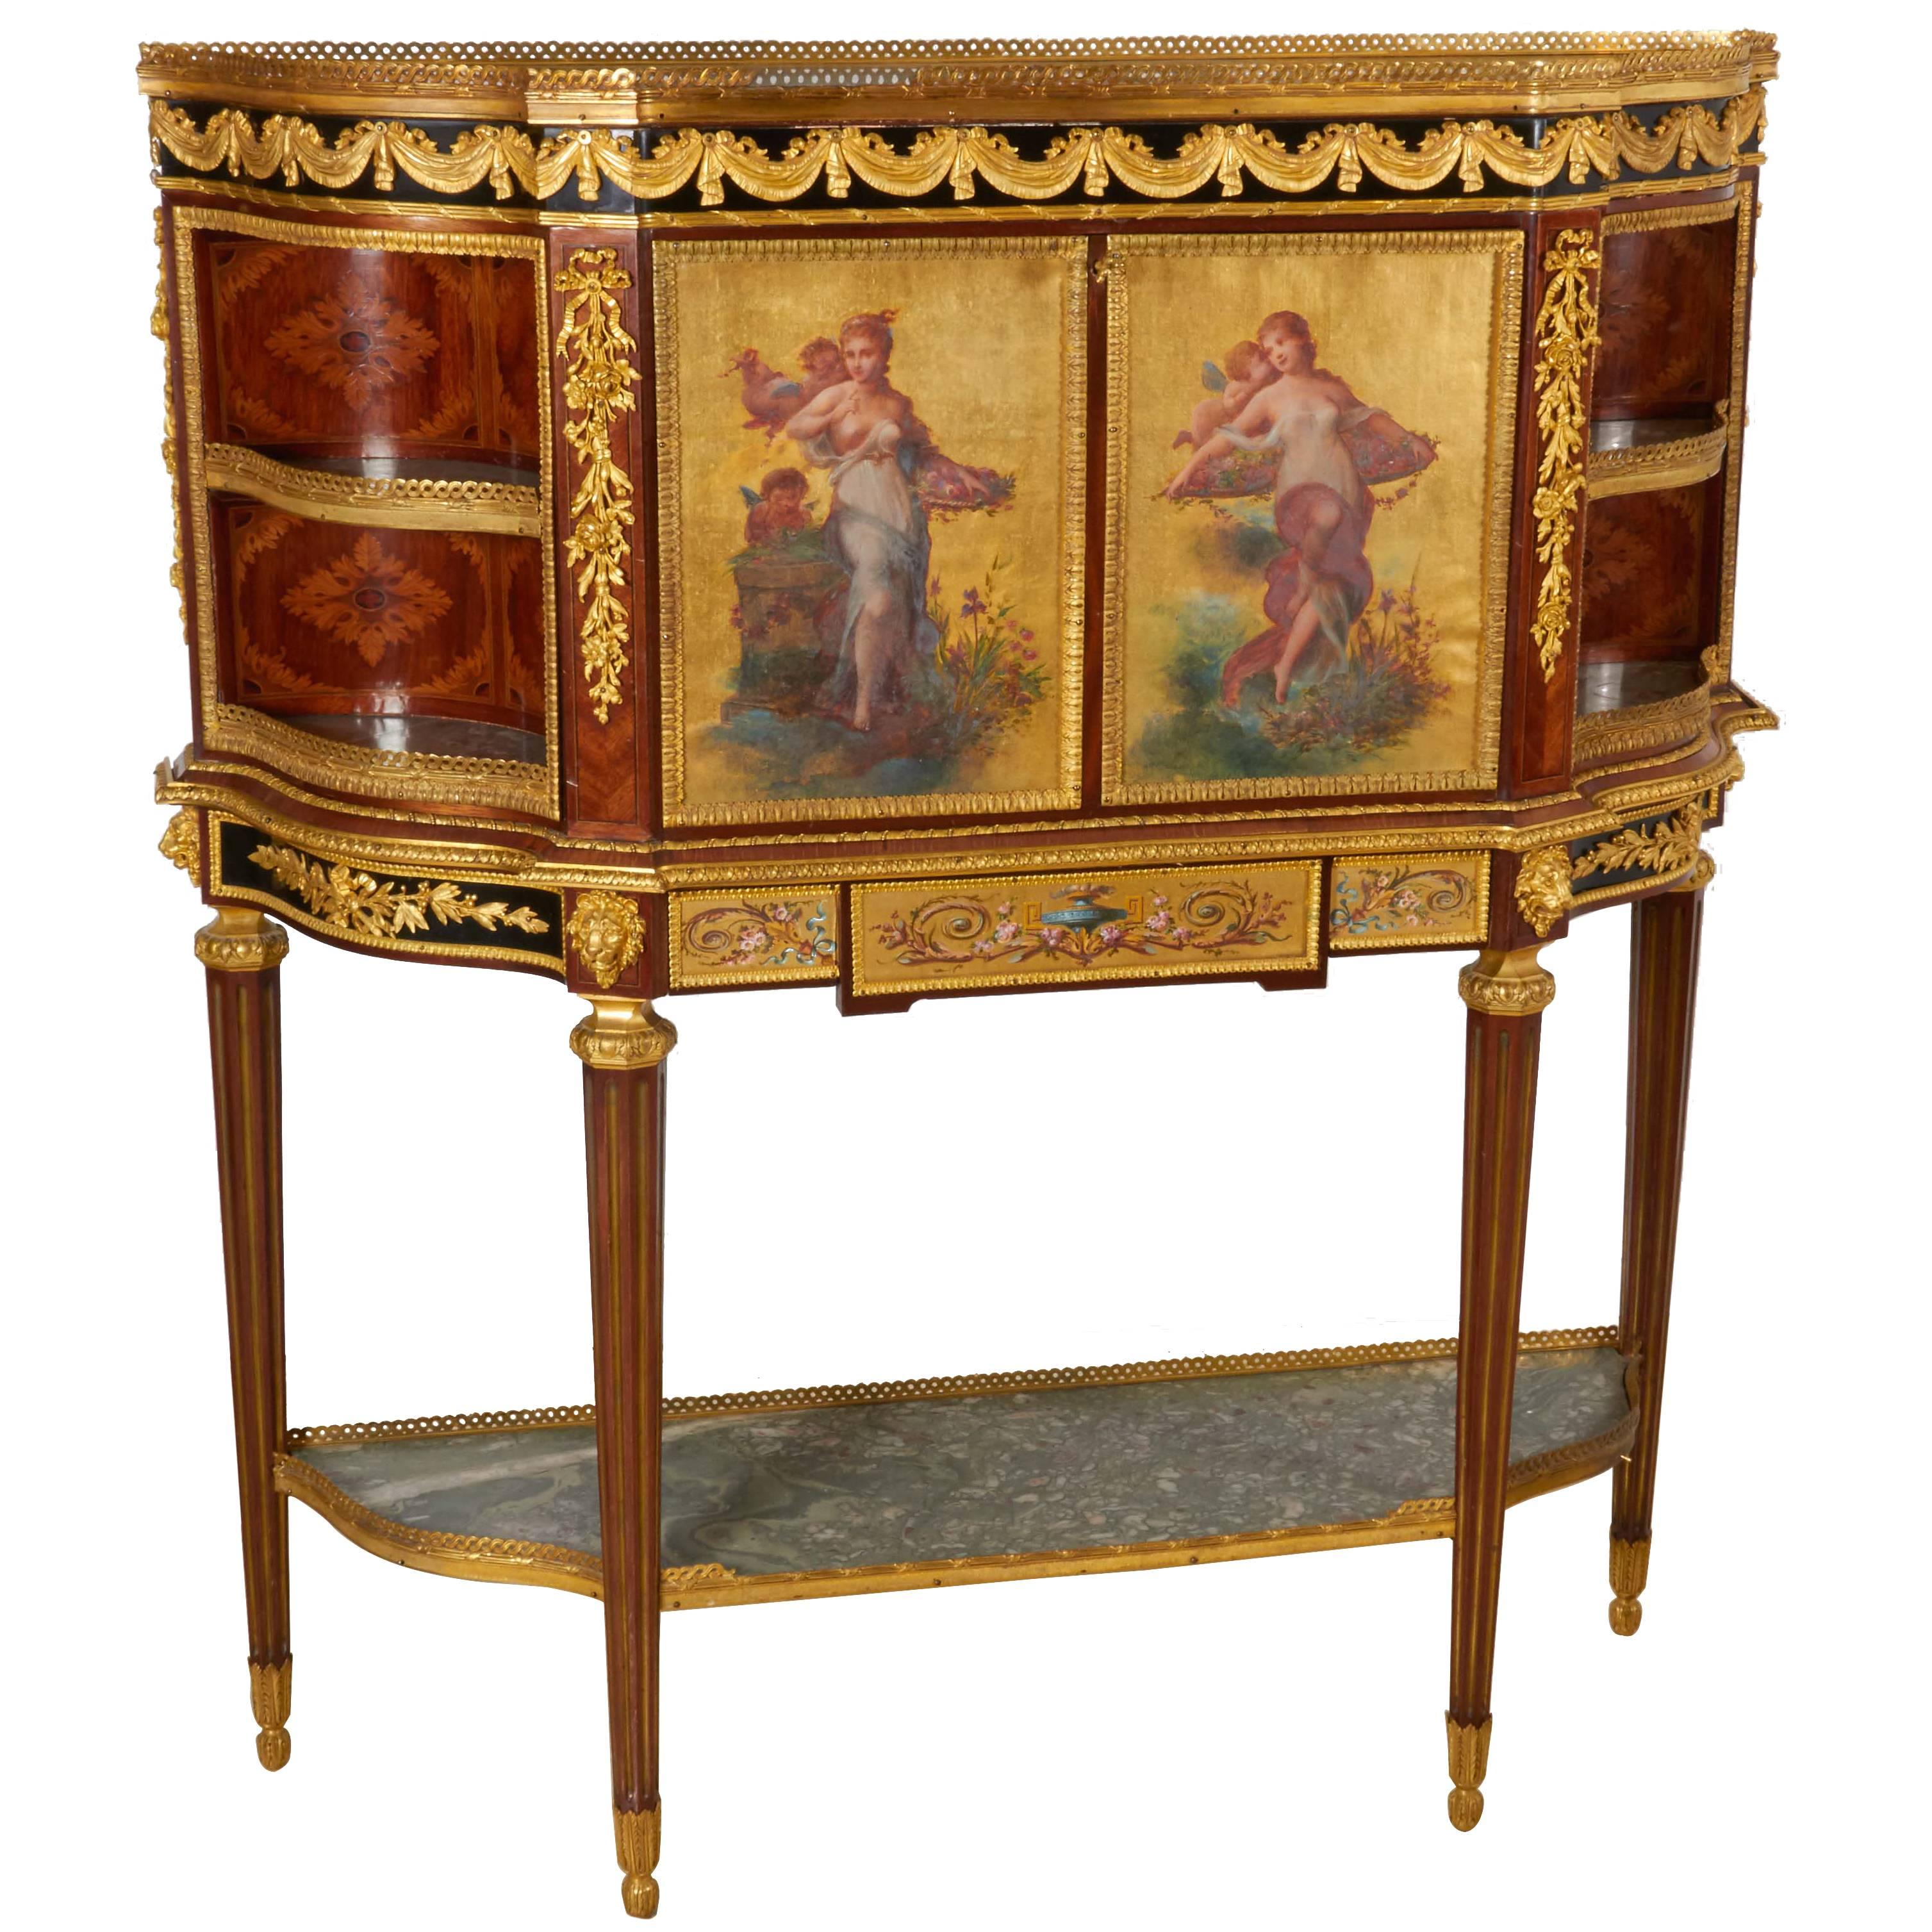 Exceptional French Ormolu-Mounted Mahogany Marquetry Secretaire a Abattant Desk